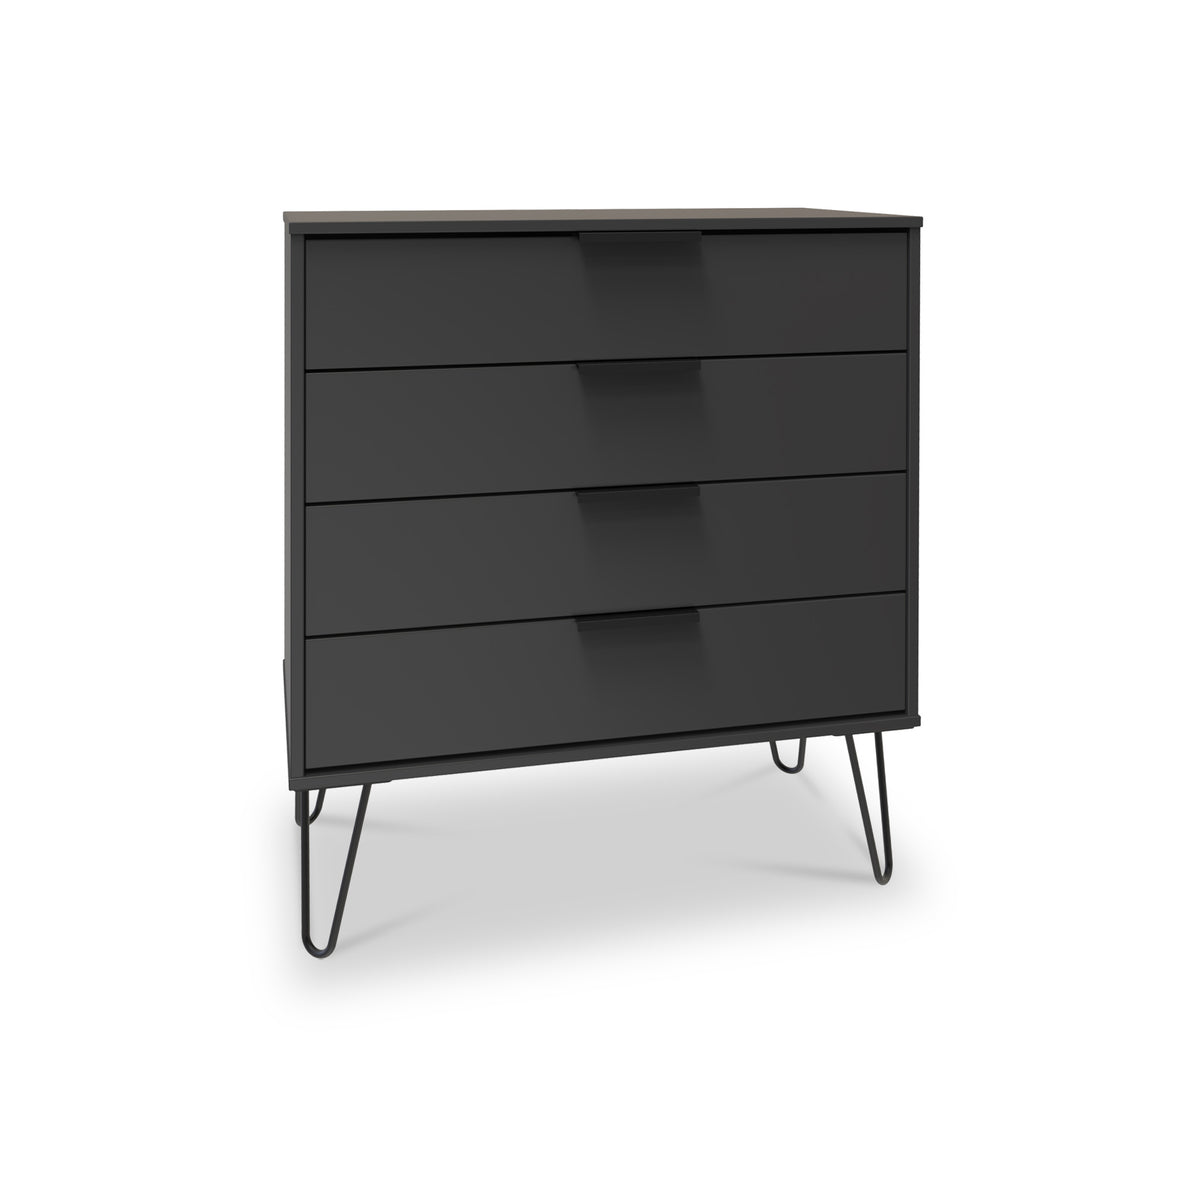 Moreno Graphite Grey 4 Drawer Chest with hairpin legs from Roseland furniture